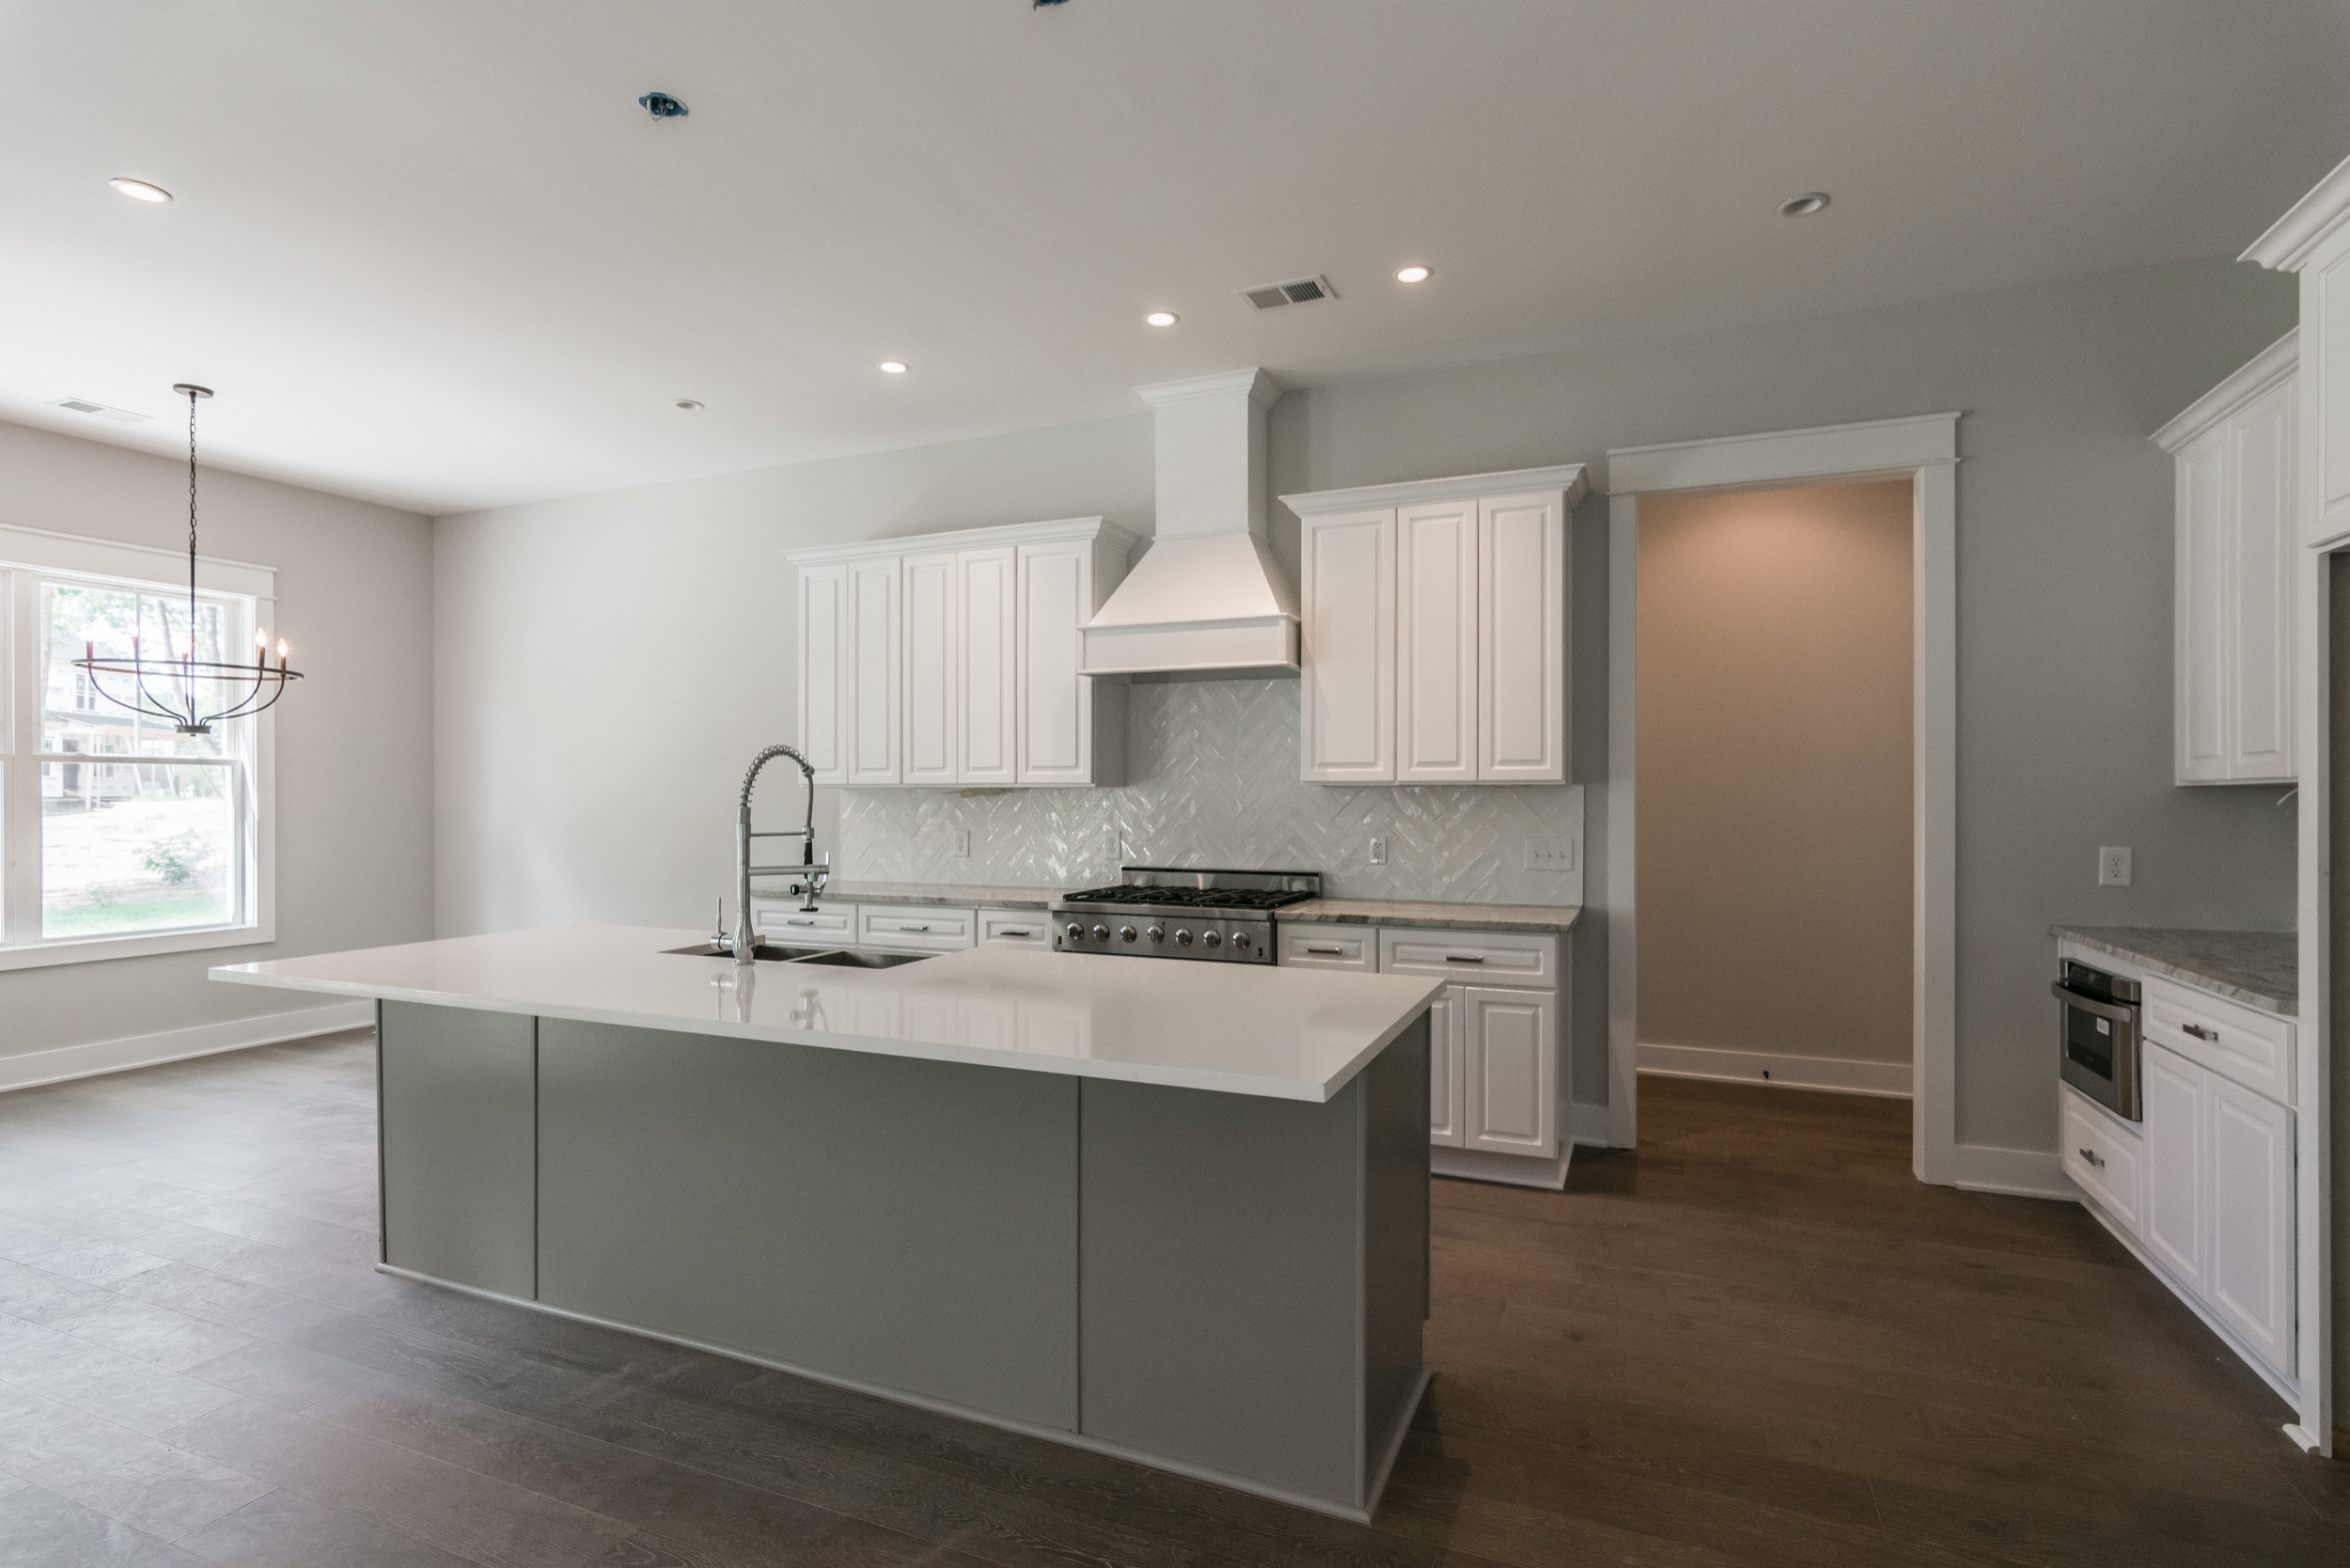 75 Beautiful Vinyl Floor Kitchen With White Cabinets Pictures Ideas July 2021 Houzz